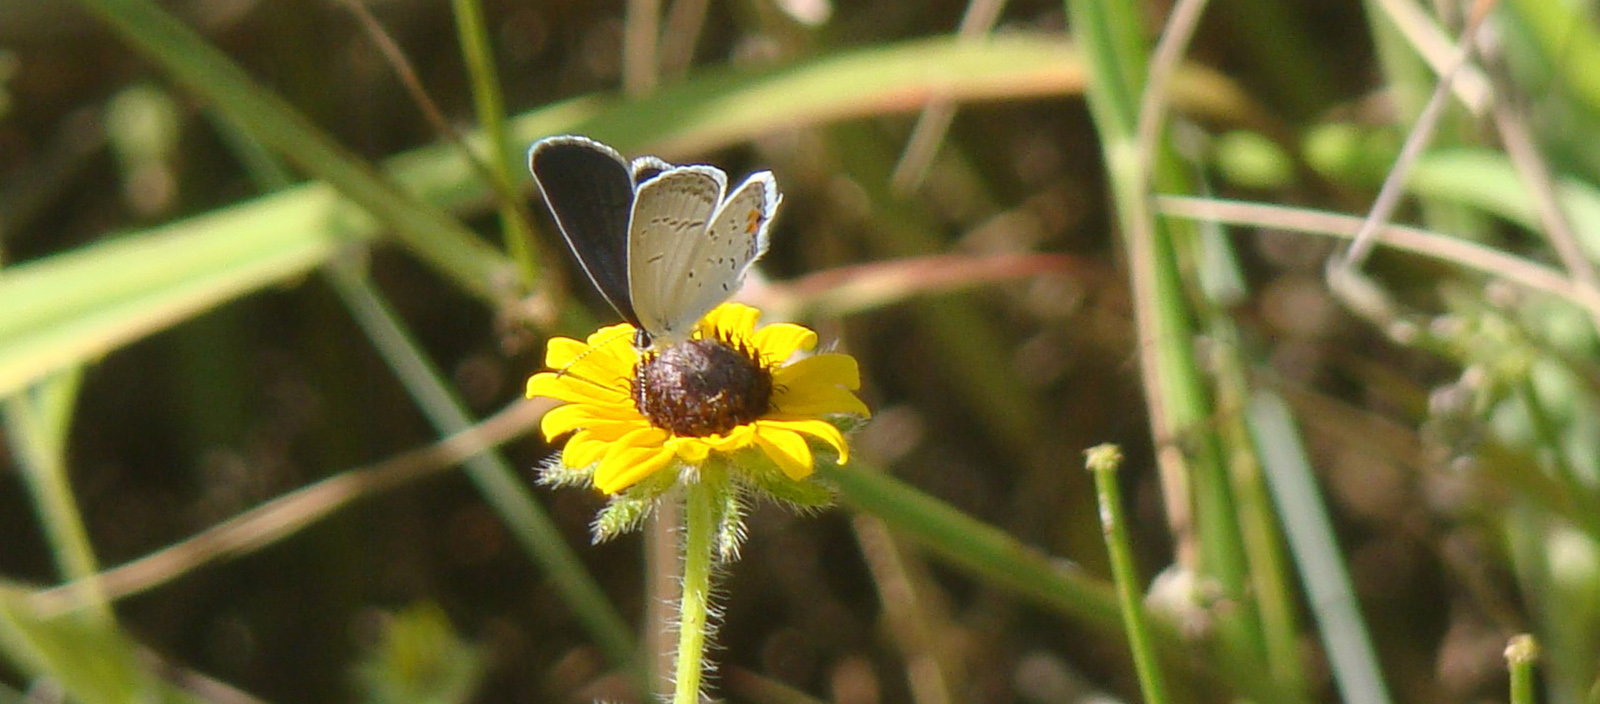 An image of an eastern tailed blue butterfly on a small yellow flower